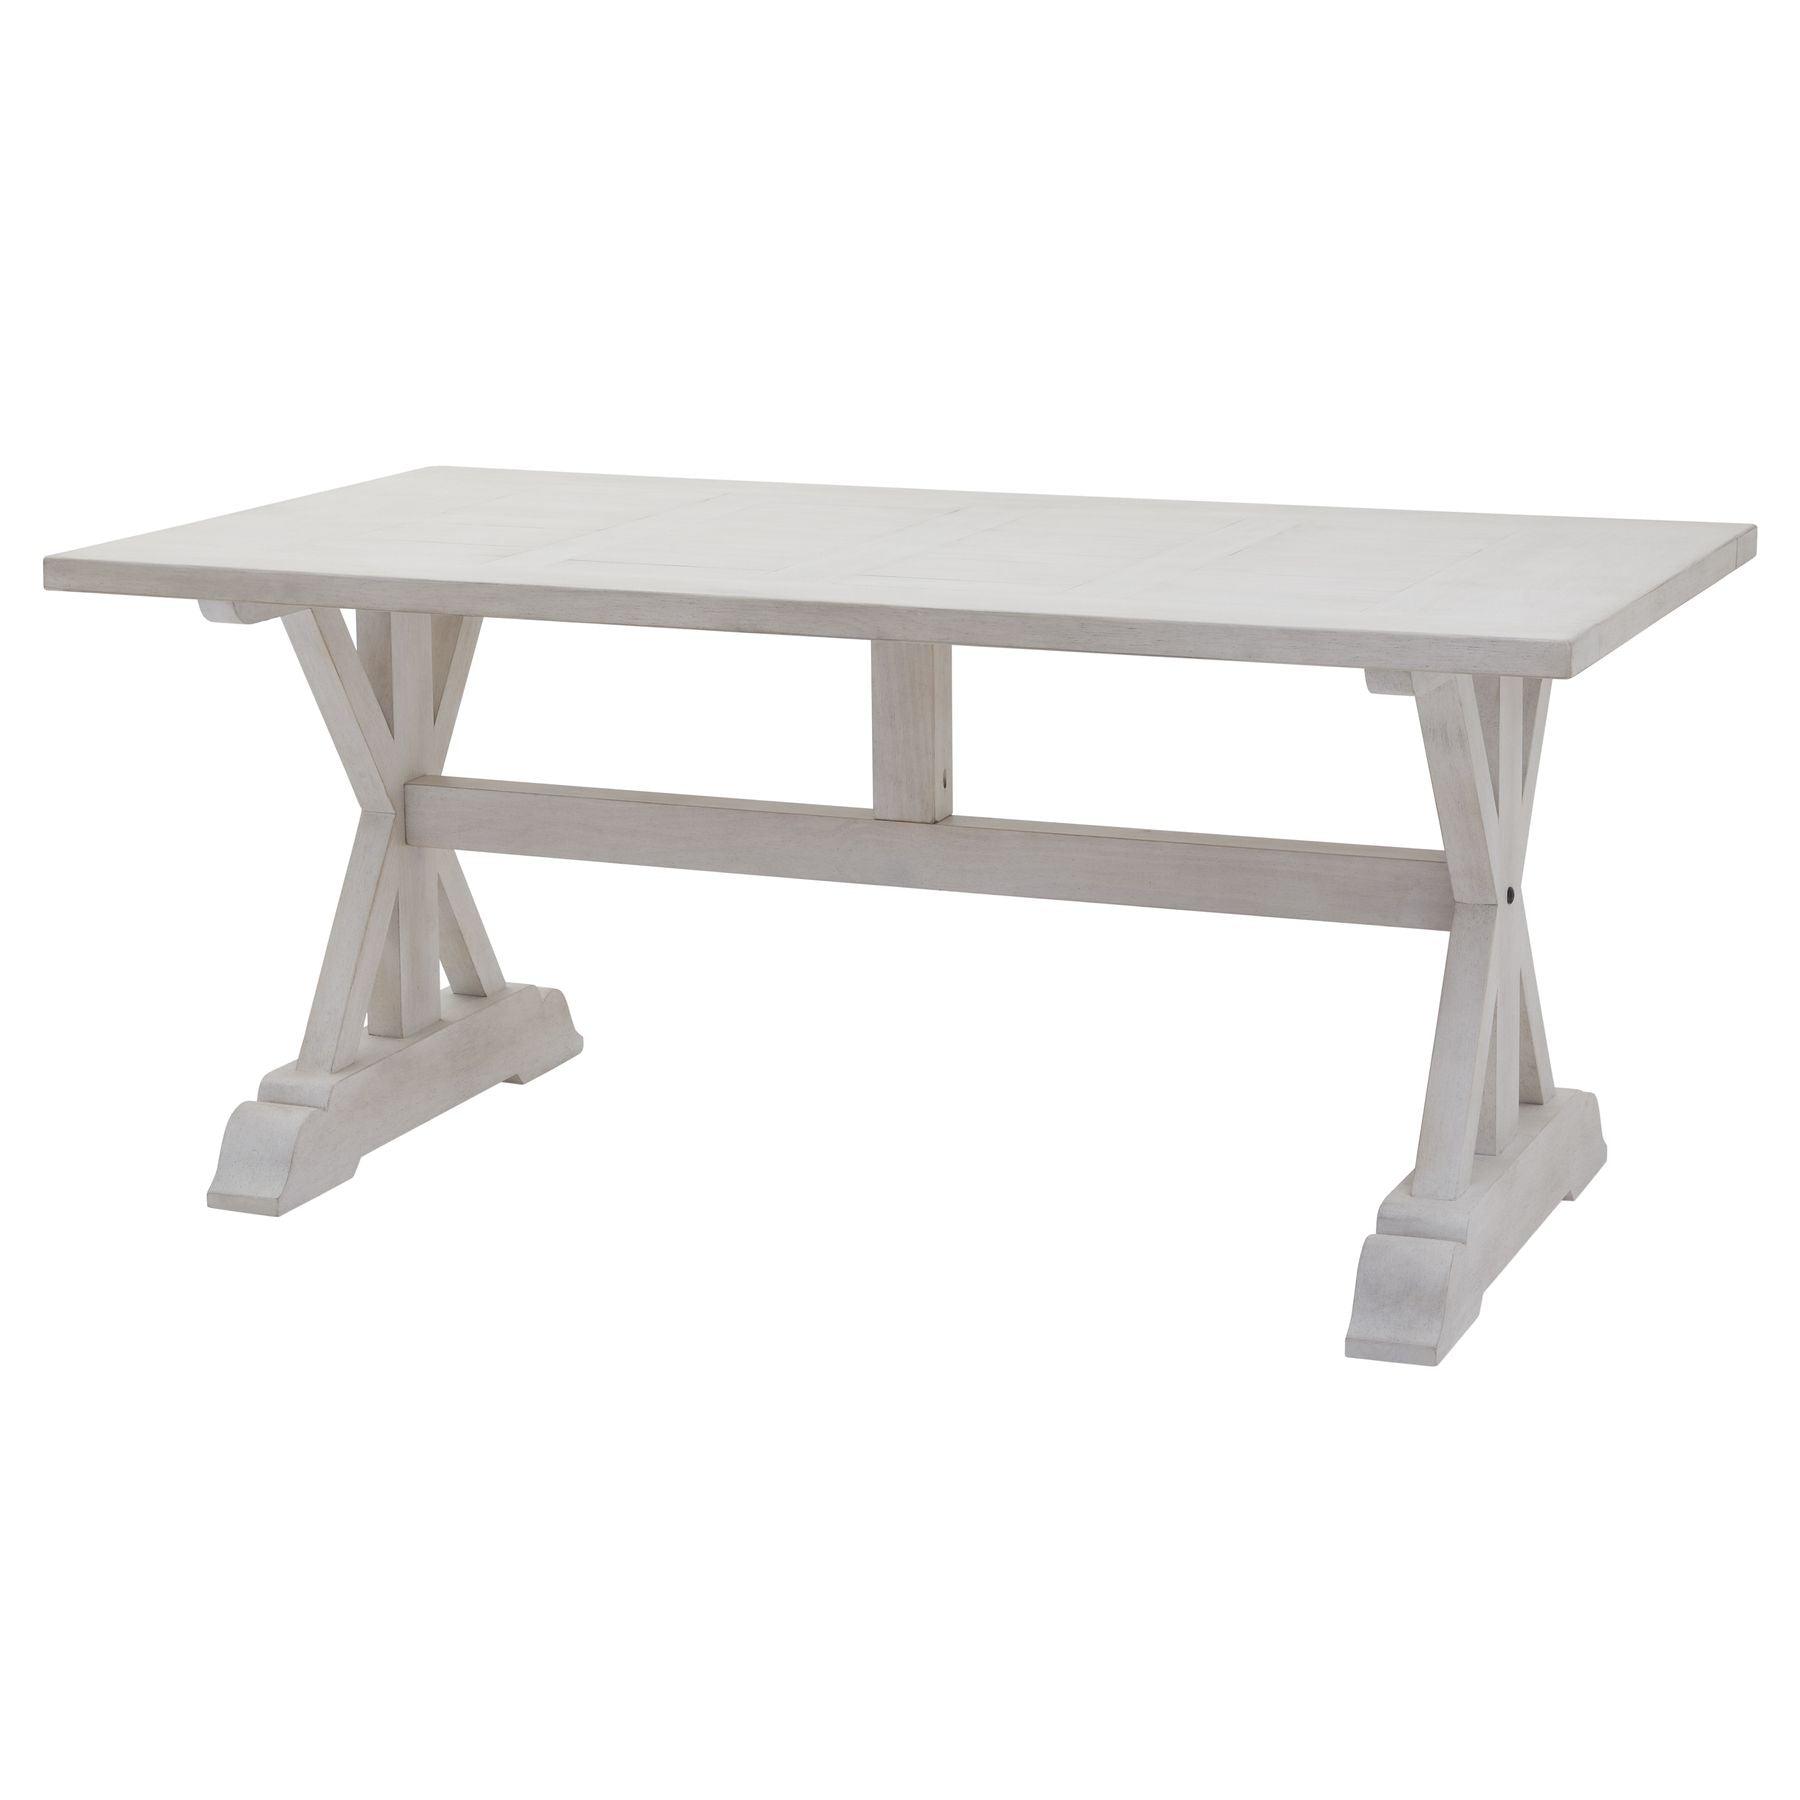 Stamford Plank Collection Dining Table - Abode Decor